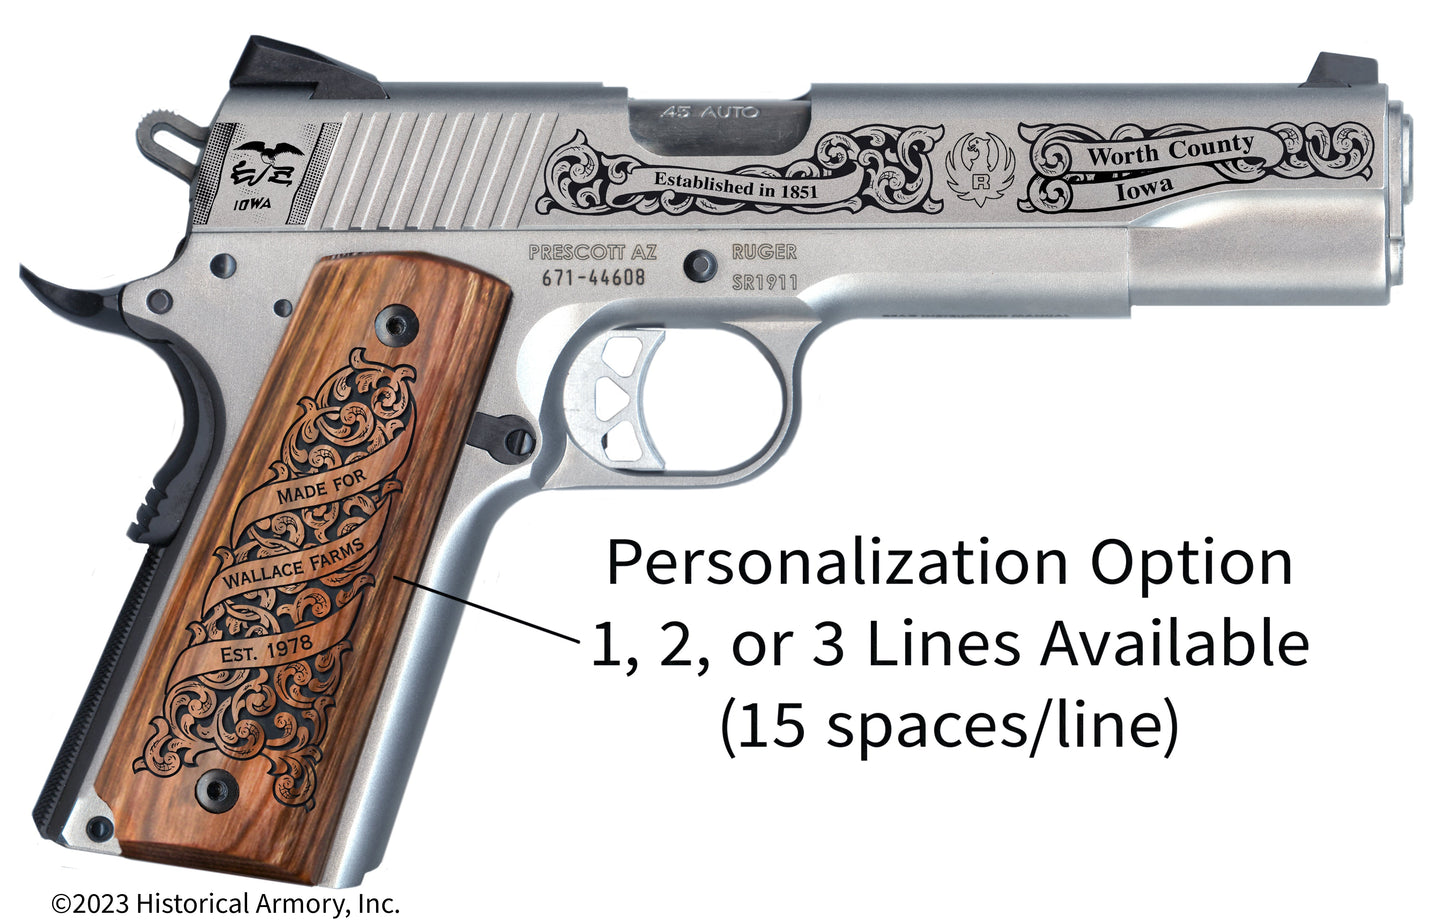 Worth County Iowa Personalized Engraved .45 Auto Ruger 1911